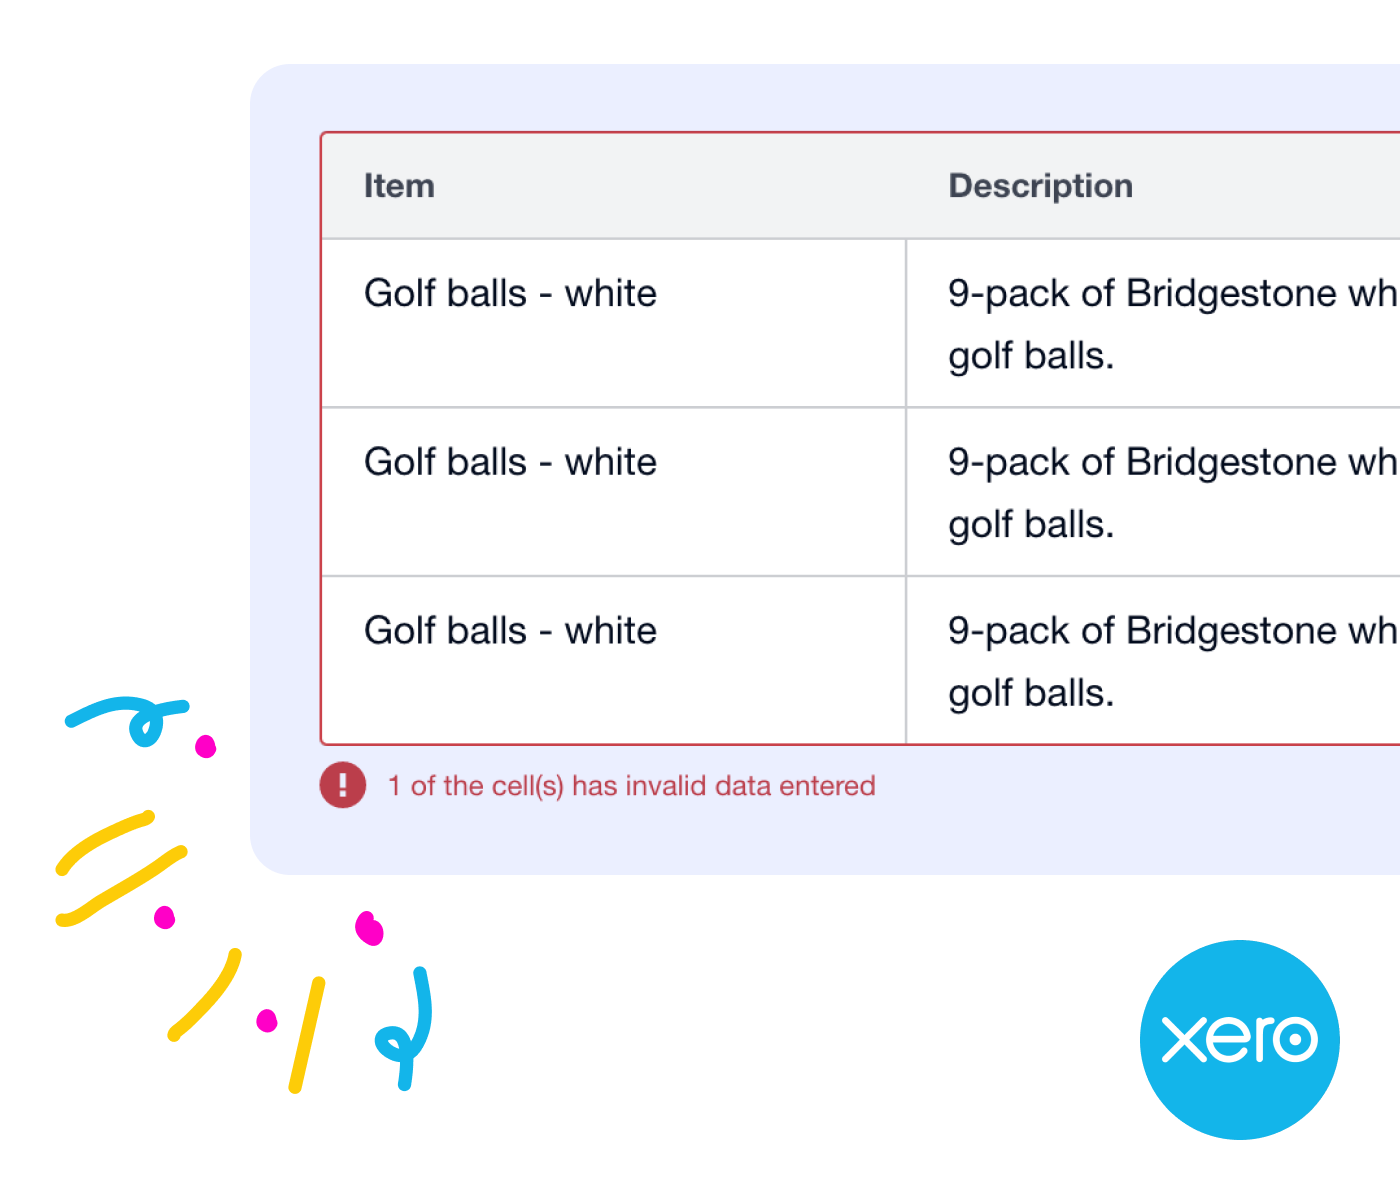 An image showing a close up of an editable table component design as well as a Xero logo in the corner